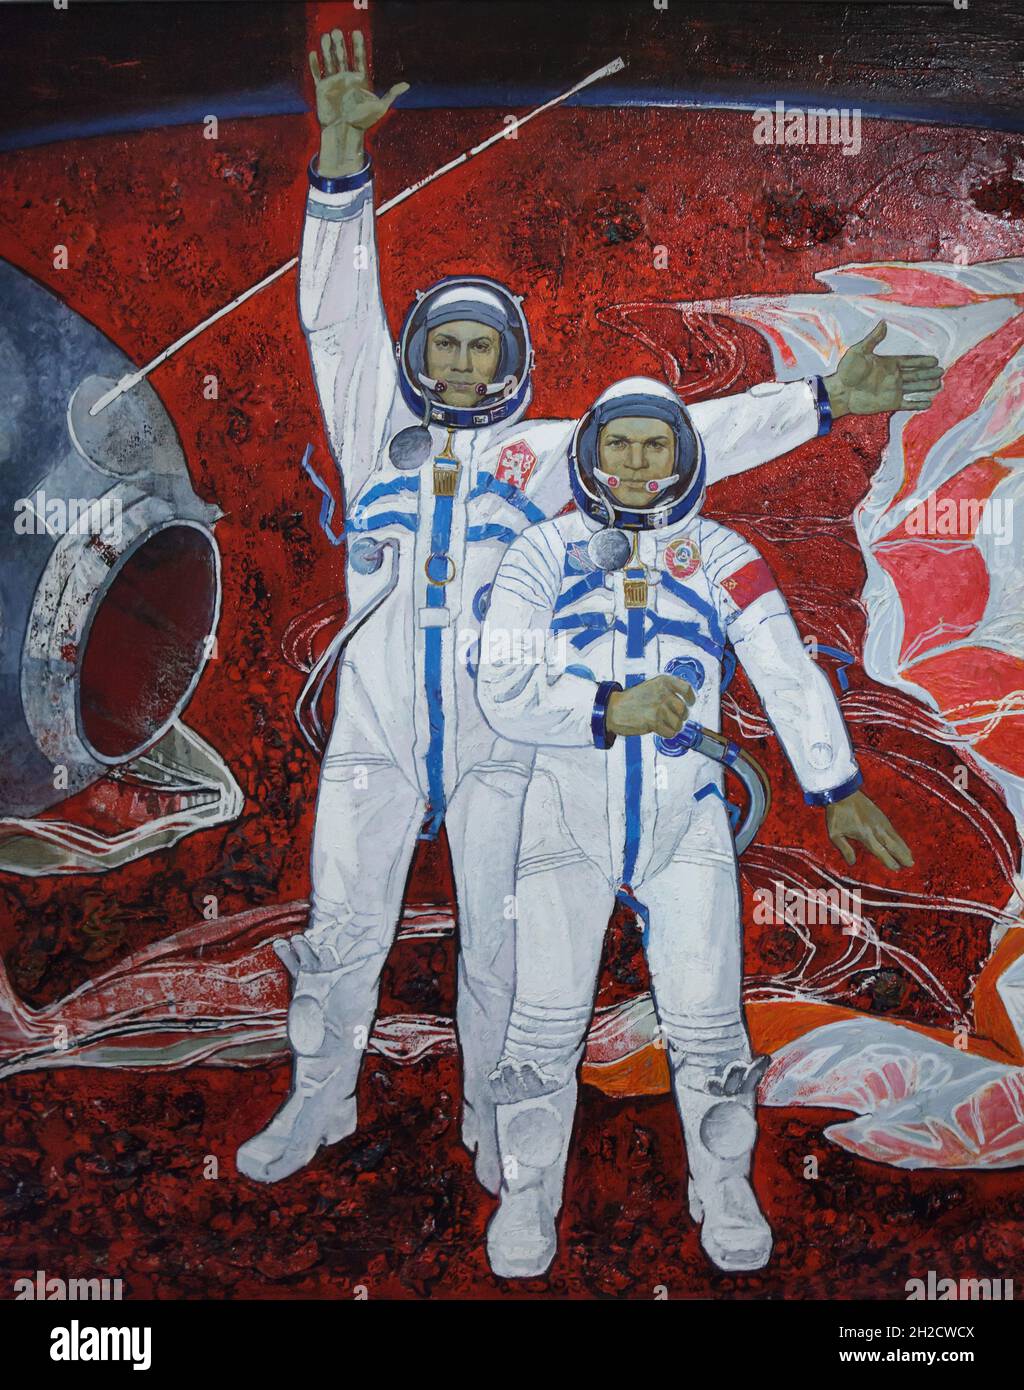 Czechoslovak cosmonaut Vladimír Remek (L) and Soviet cosmonaut Alexei Gubarev (R) depicted in the detail of the painting by Soviet cosmonaut Alexei Leonov (1981) on display in the National Museum (Národní muzeum) in Prague, Czech Republic. Vladimír Remek and Alexei Gubarev were the crew members of the 1978 Soviet crewed mission 'Soyuz 28'. The cosmonauts are depicted shortly after the landing in the Kazakh Steppe near the town of Arkalyk in Kazakhstan on 10 March 1978. The painting is on view at the new permanent exhibition of the National Museum devoted to the History of the 20th century. Stock Photo